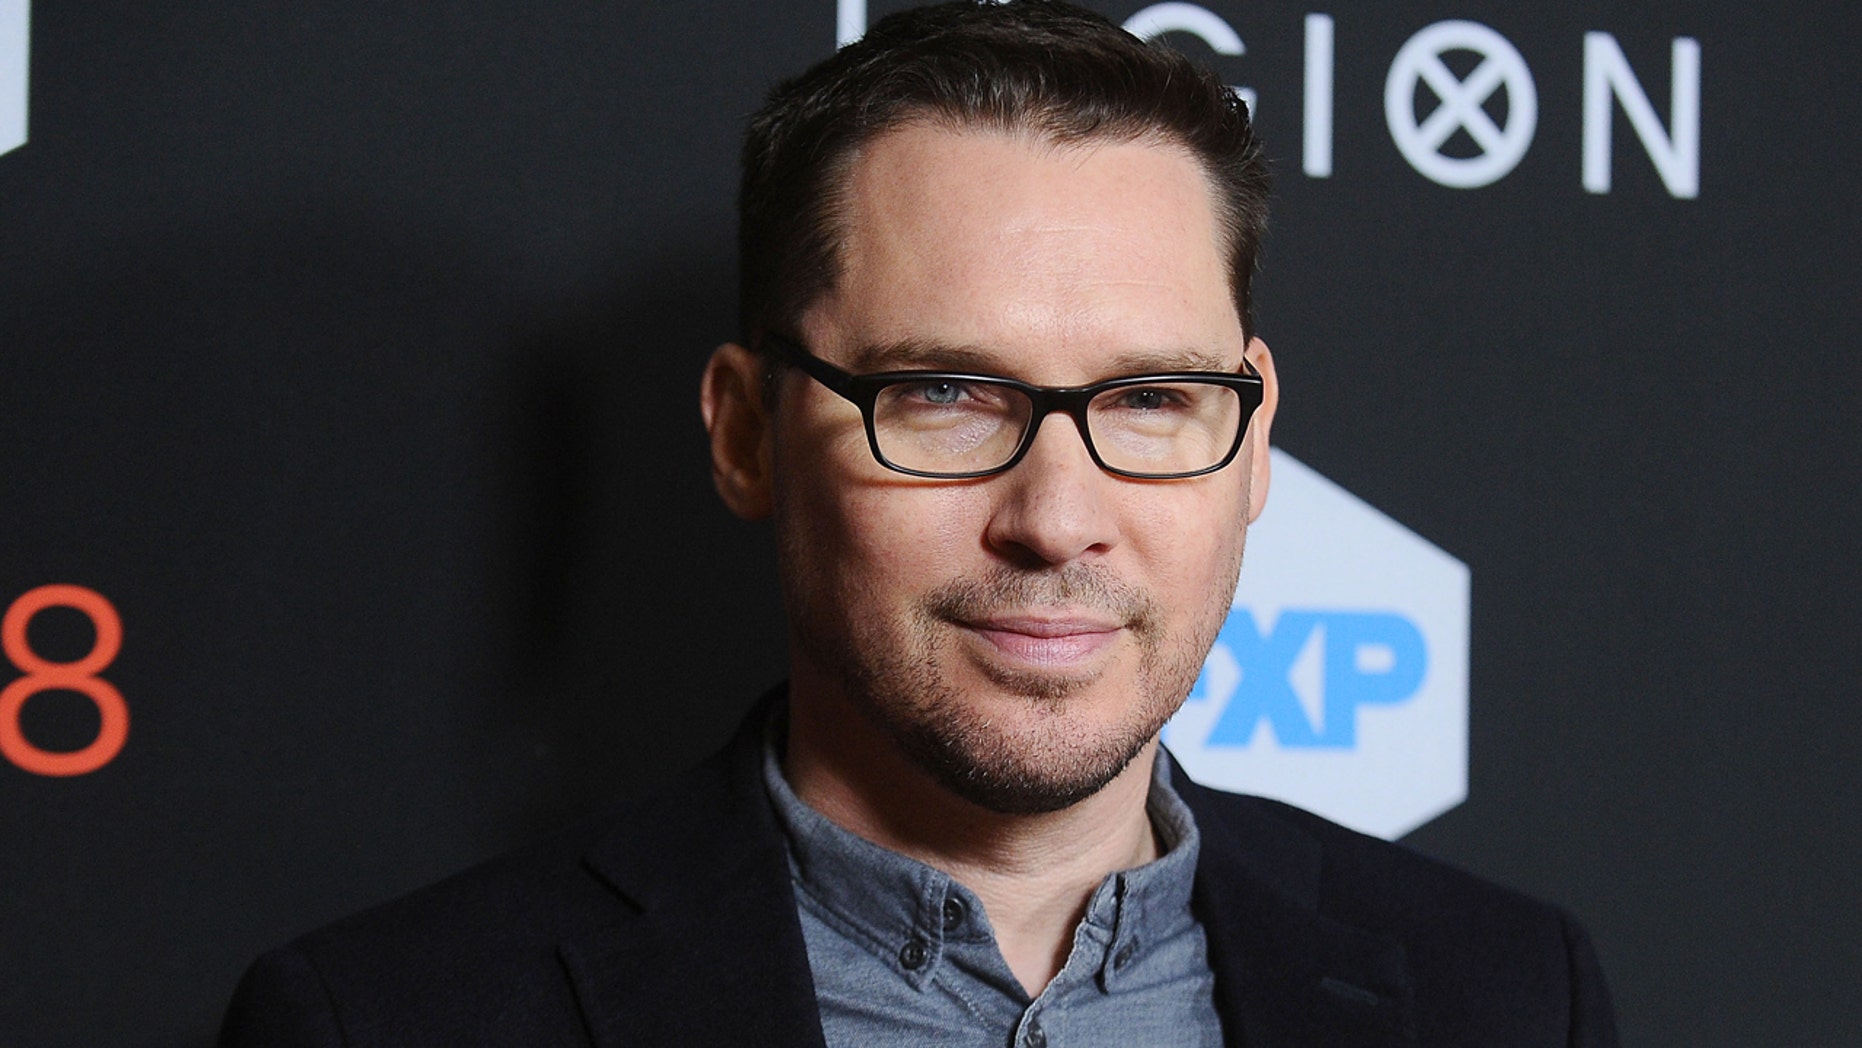 Director Bryan Singer accused by more men of underage sexual misconduct in bombshell report